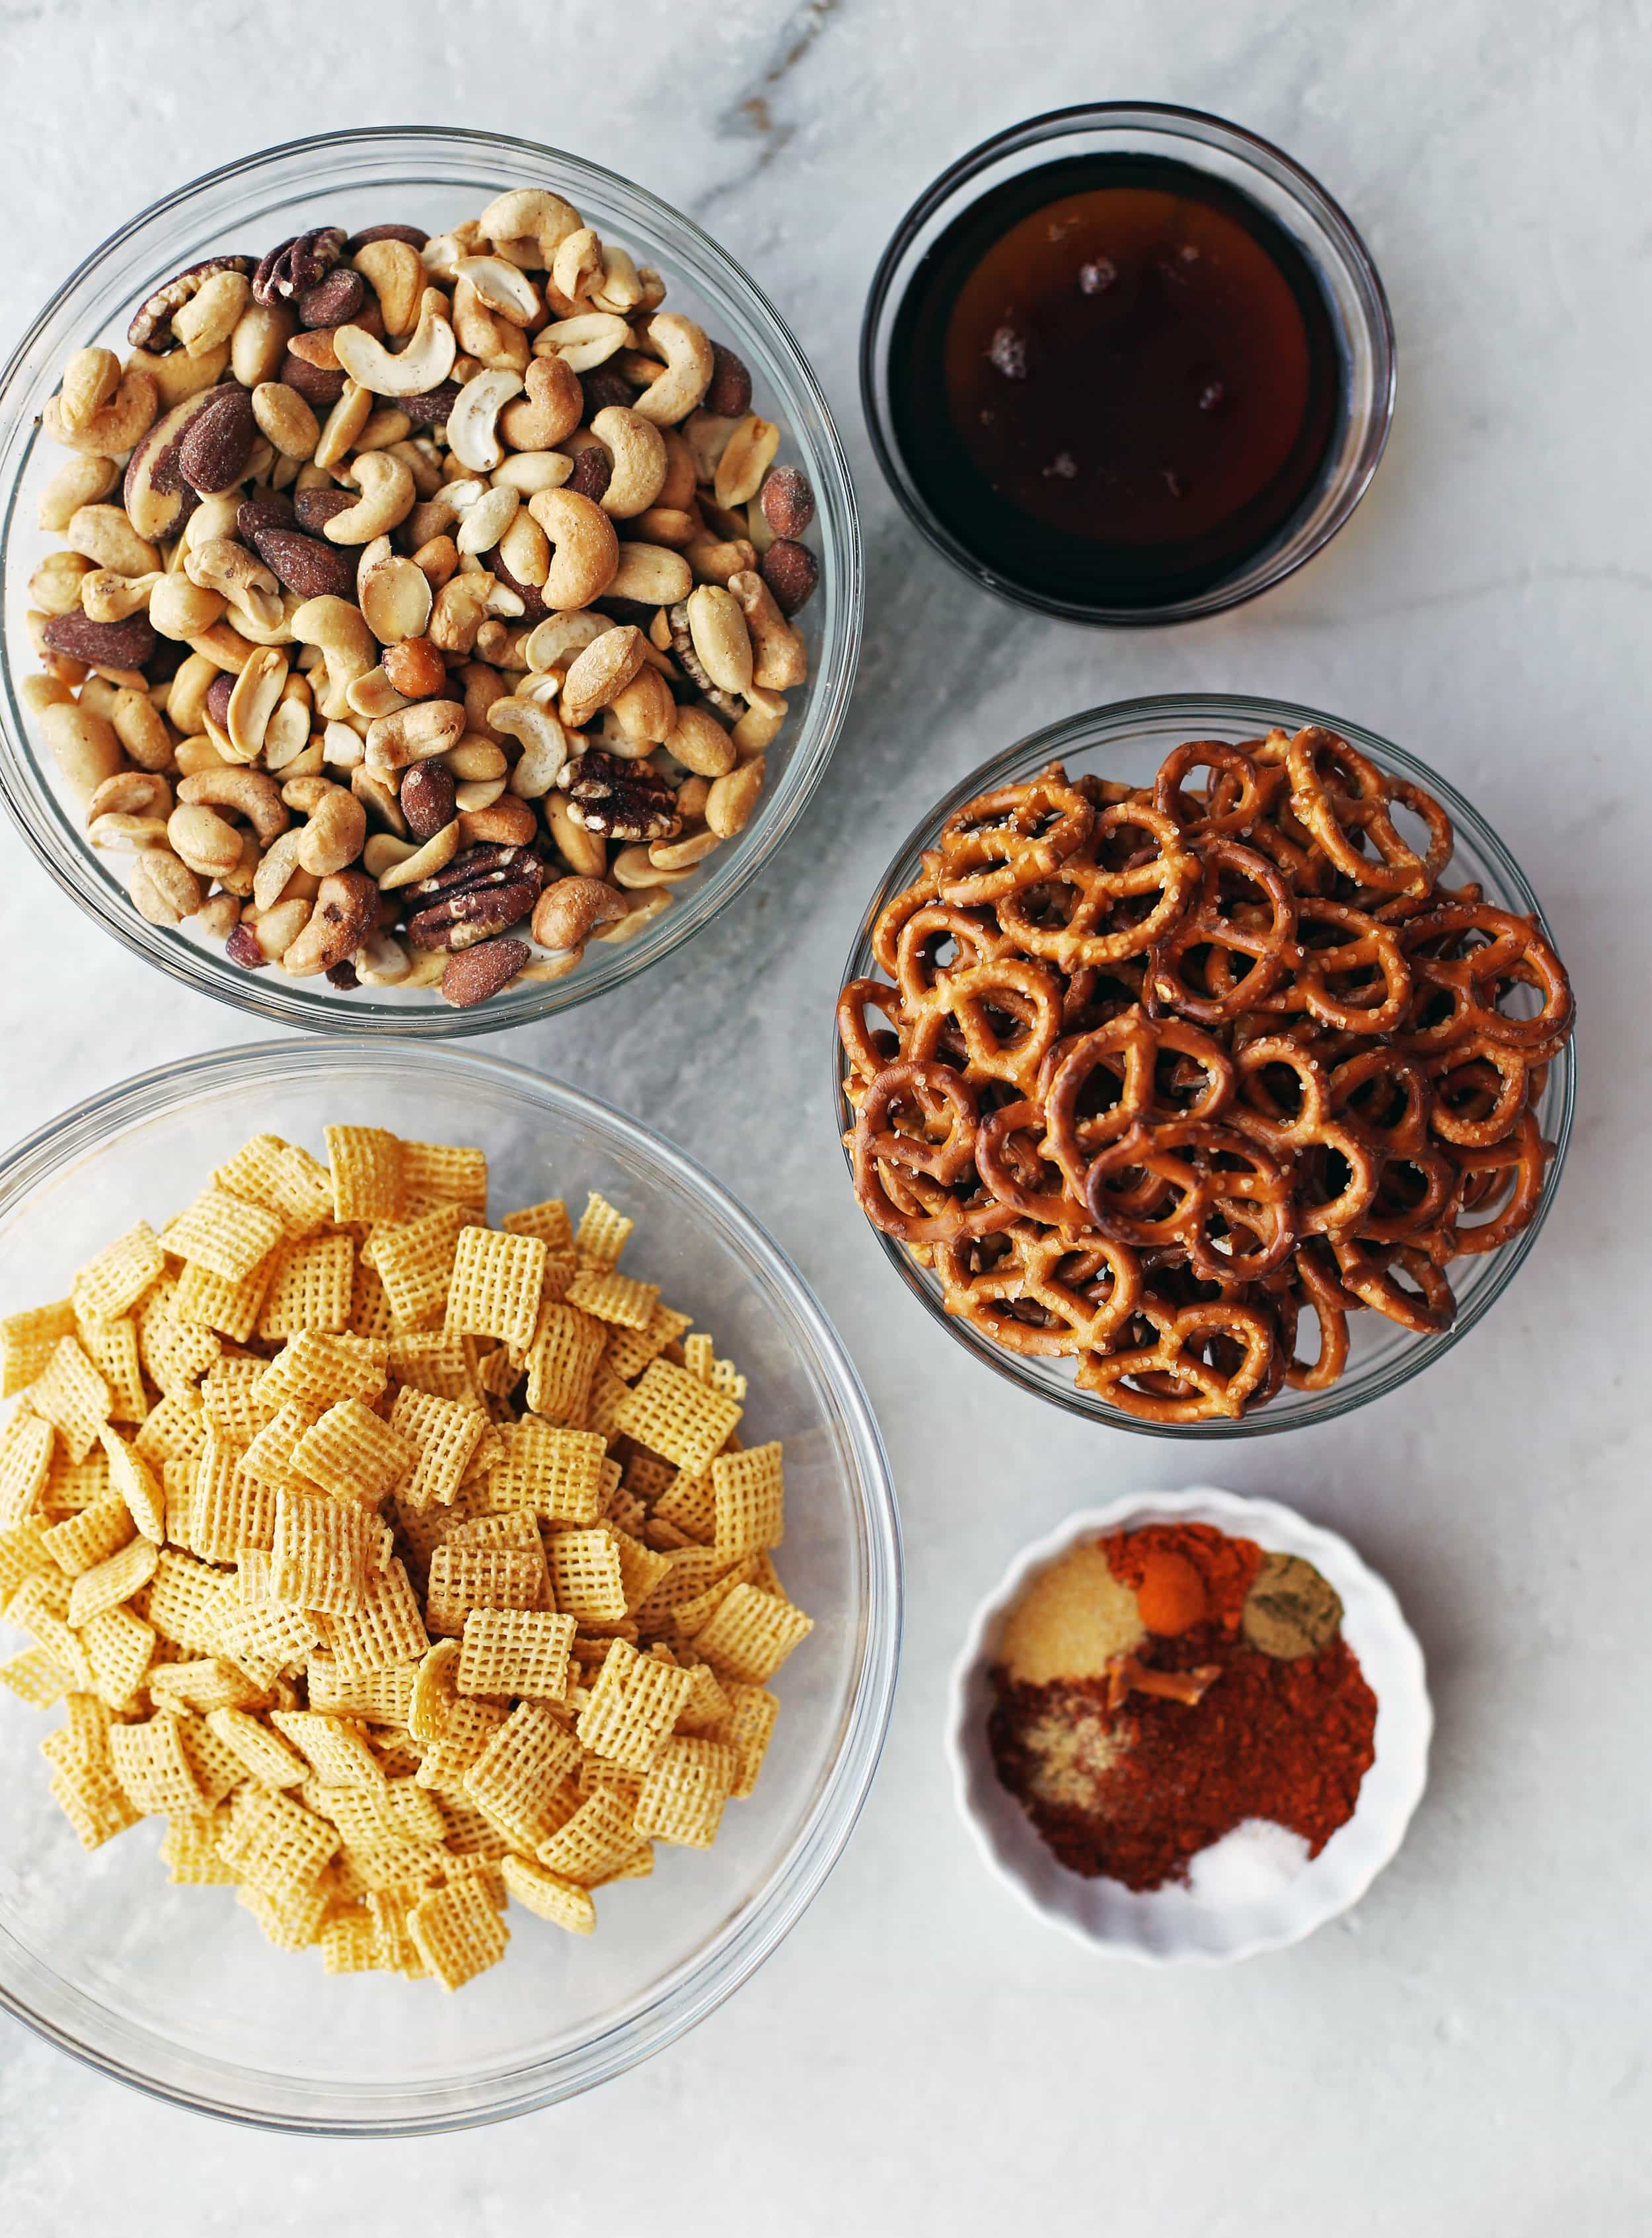 Glass bowls filled with Chex cereal, mini pretzels, mixed nuts, maple syrup, and spices.